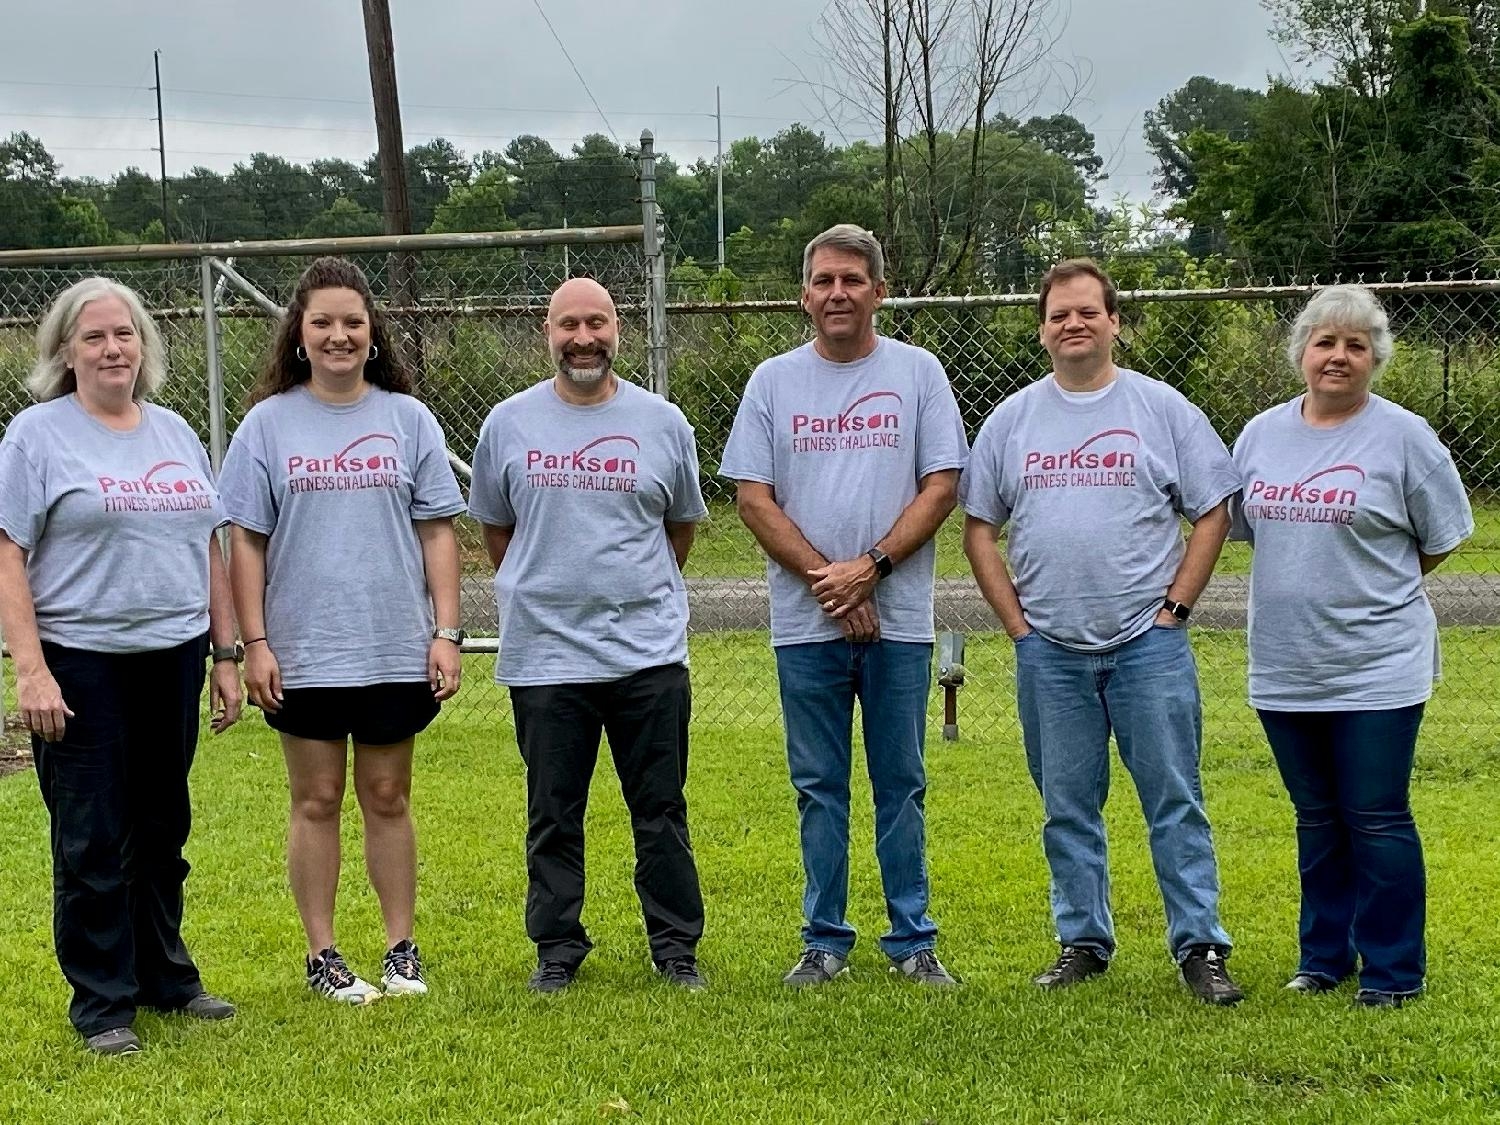 Trussville office team members ready to start the Fitness Challenge